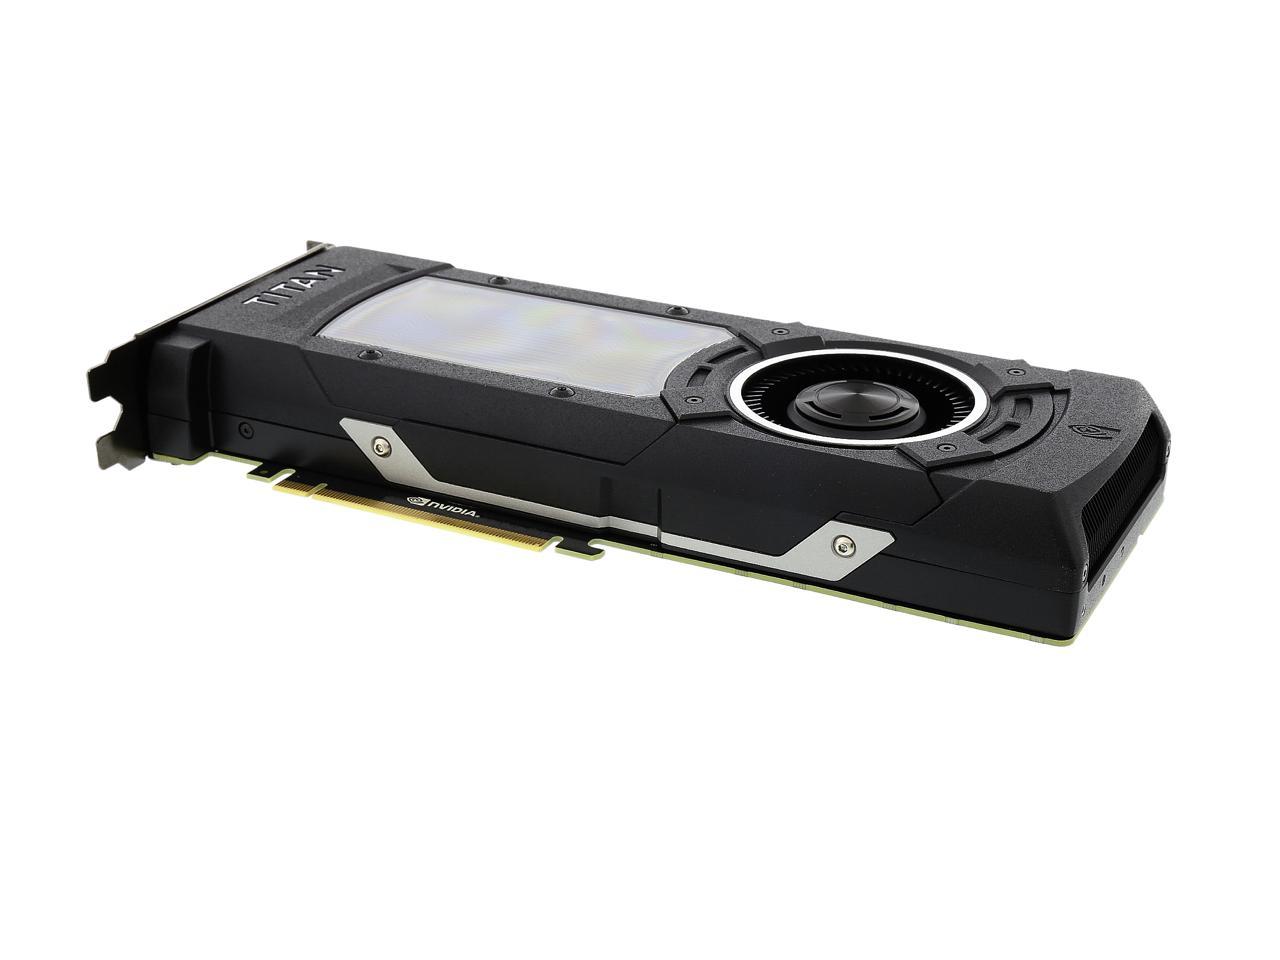 EVGA GeForce GTX TITAN X 12G-P4-2992-KR 12GB SC GAMING, Play 4k with Ease  Graphics Card